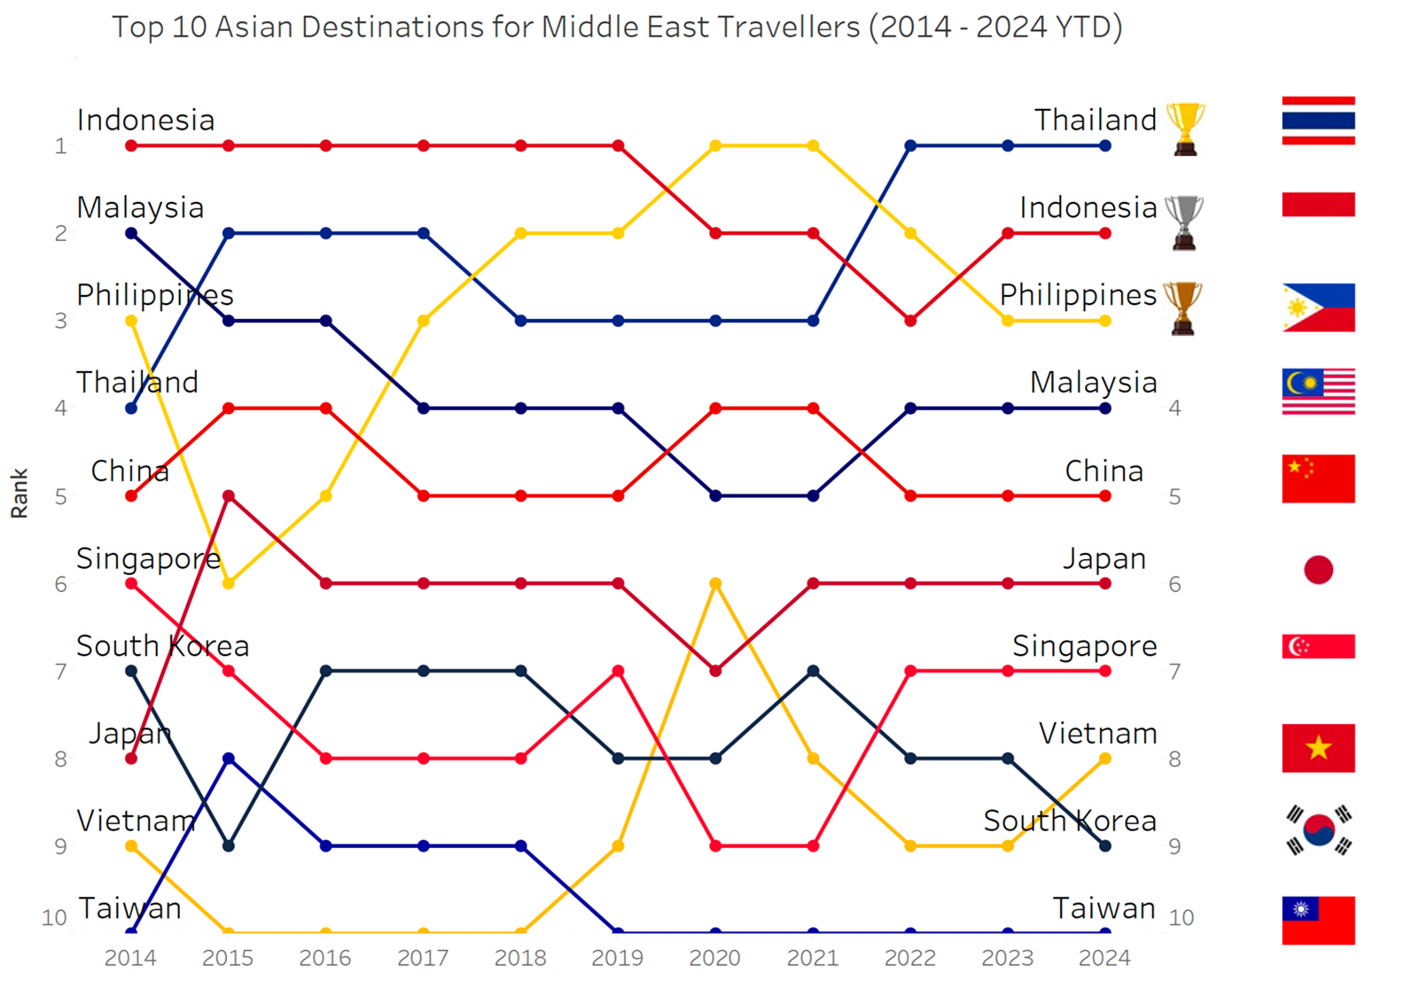 Top 10 Asian Destinations for Middle East Travellers